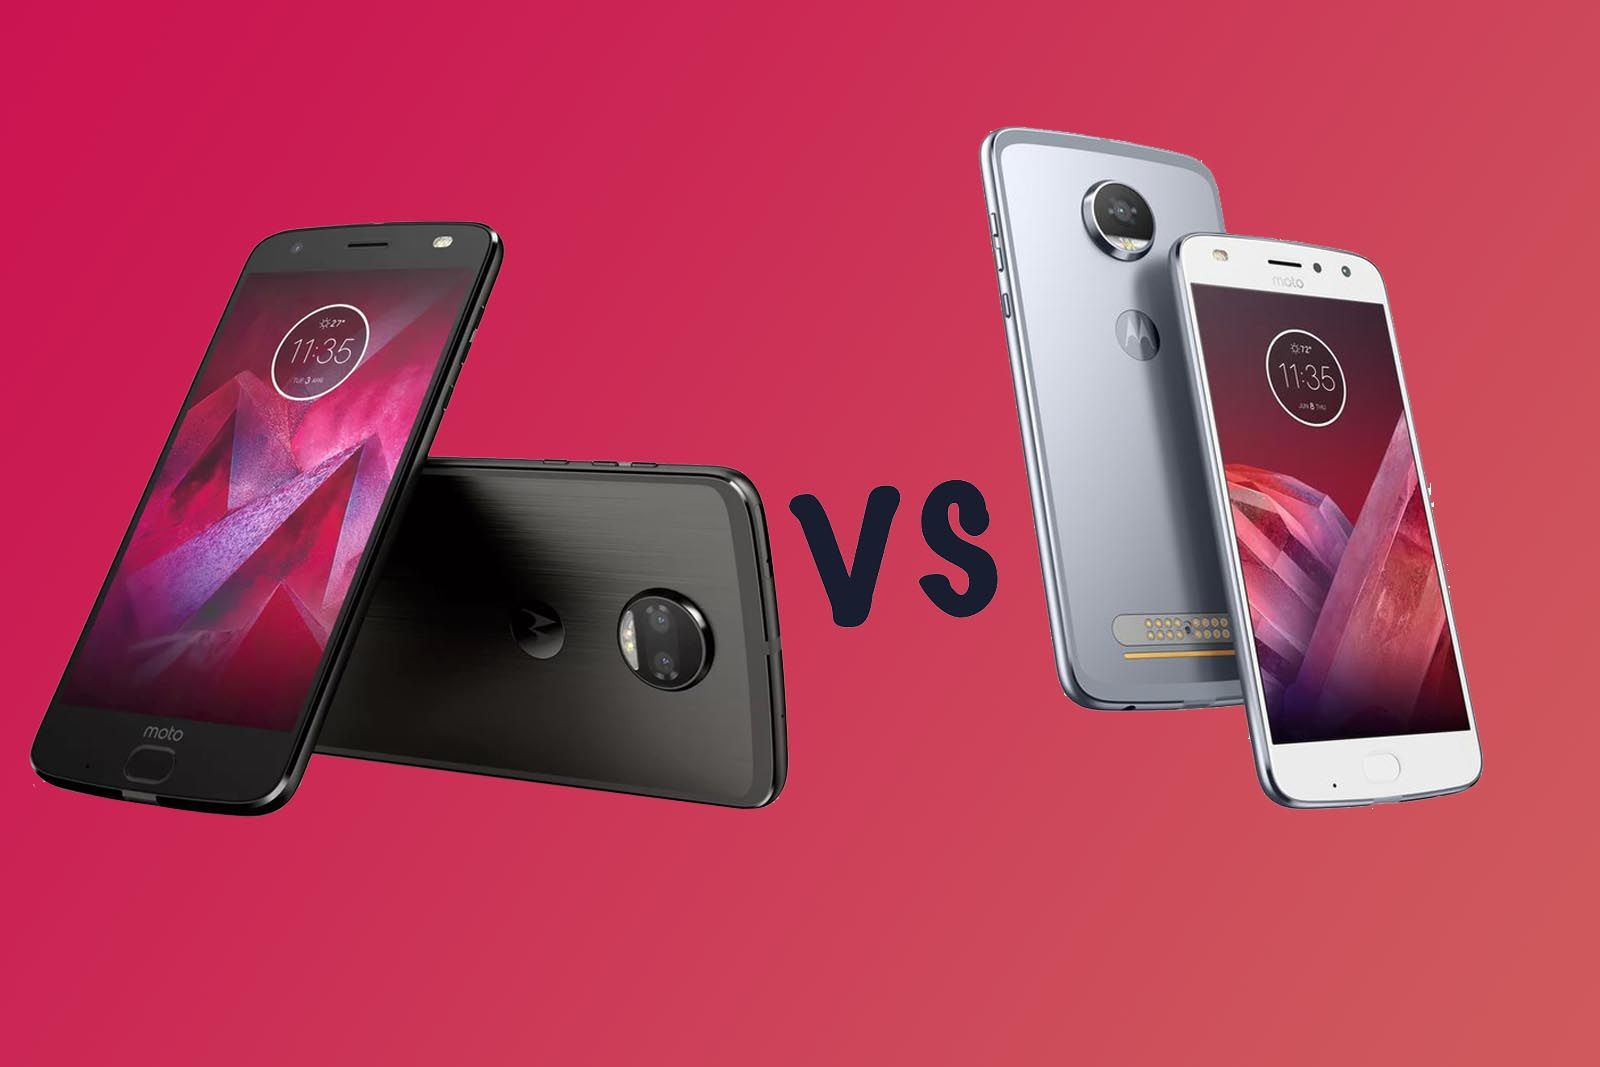 Moto Z2 Play Vs Z2 Force What S The Difference image 1